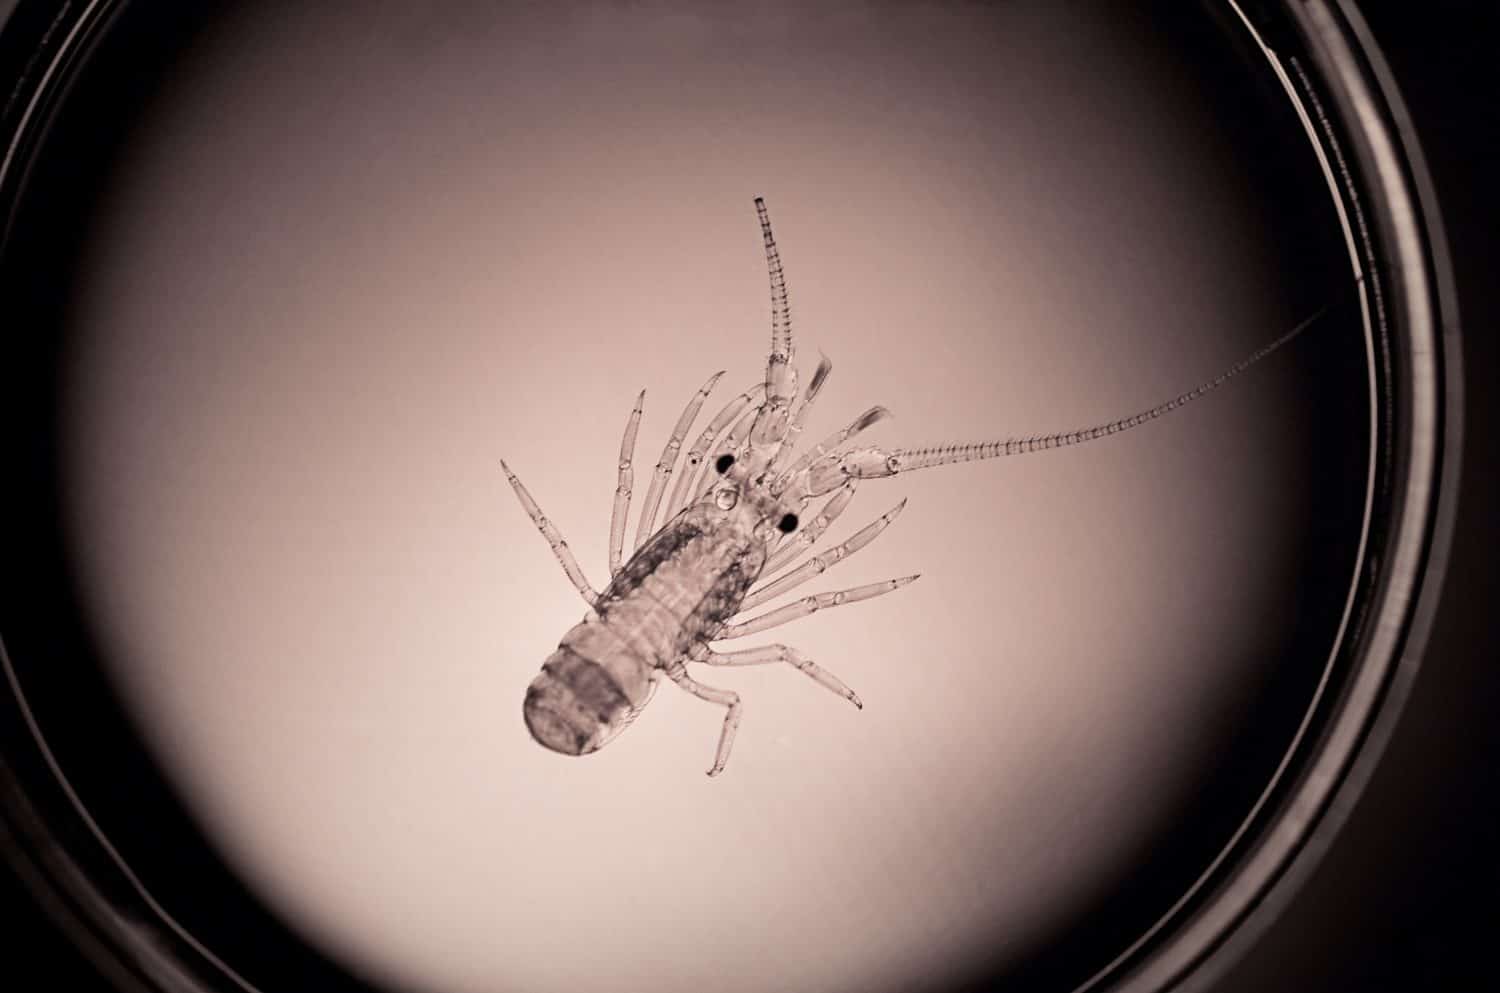 A tiny baby Southern Rock Lobster(Jasus edwardsii) on a petri dish, bred in captivity